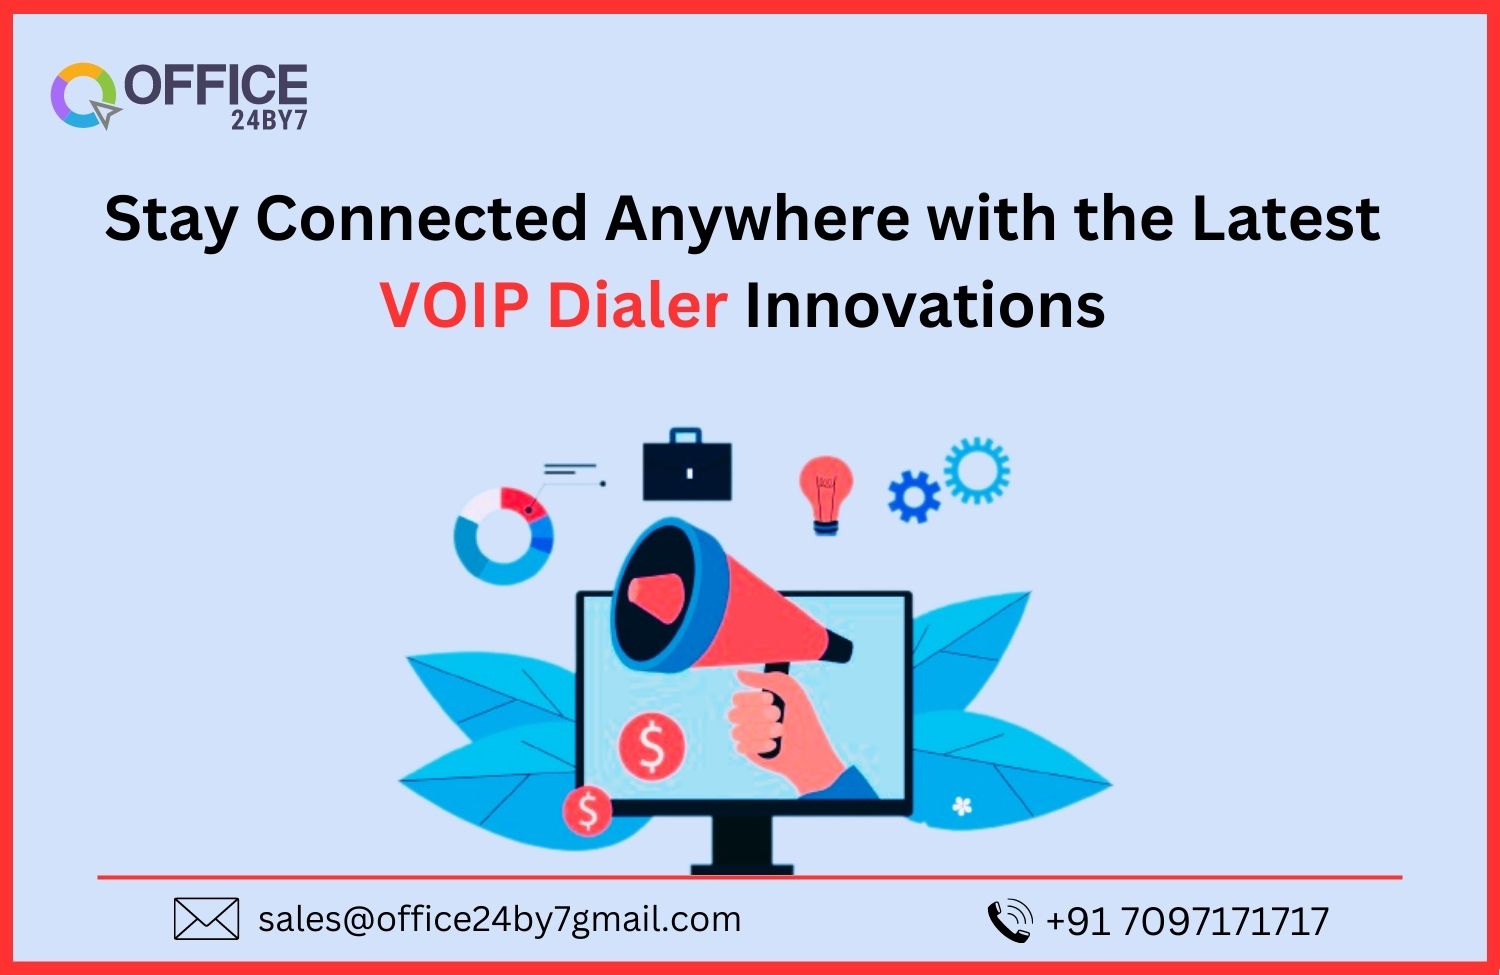 Stay Connected Anywhere with the Latest VOIP Dialer Innovations